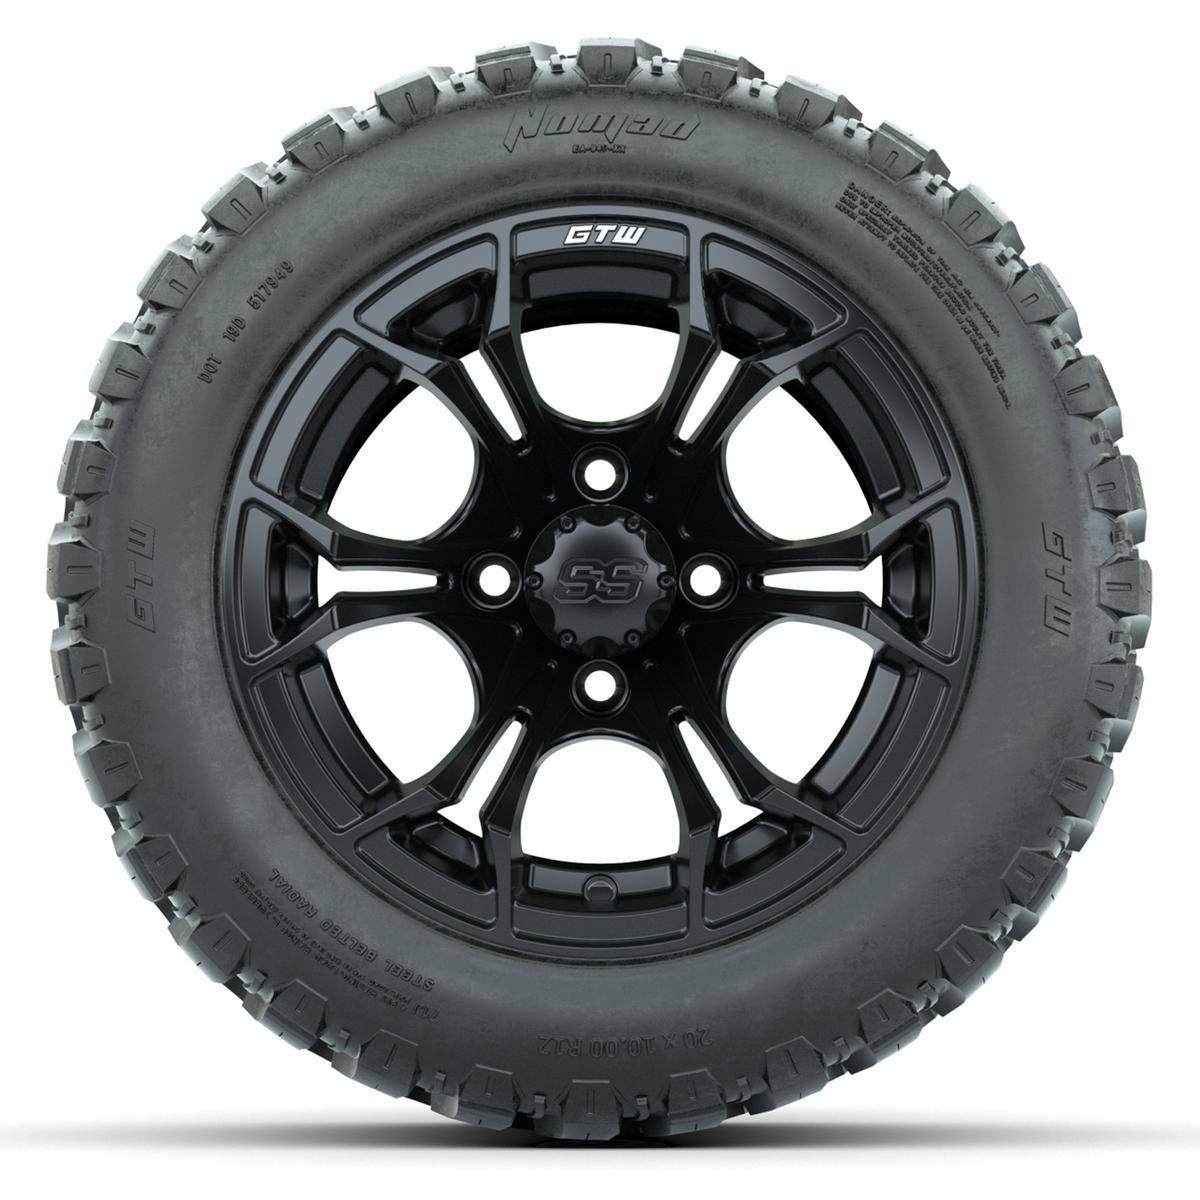 GTW Spyder Matte Black 12 in Wheels with 20x10-R12 GTW Nomad All-Terrain Tires – Full Set